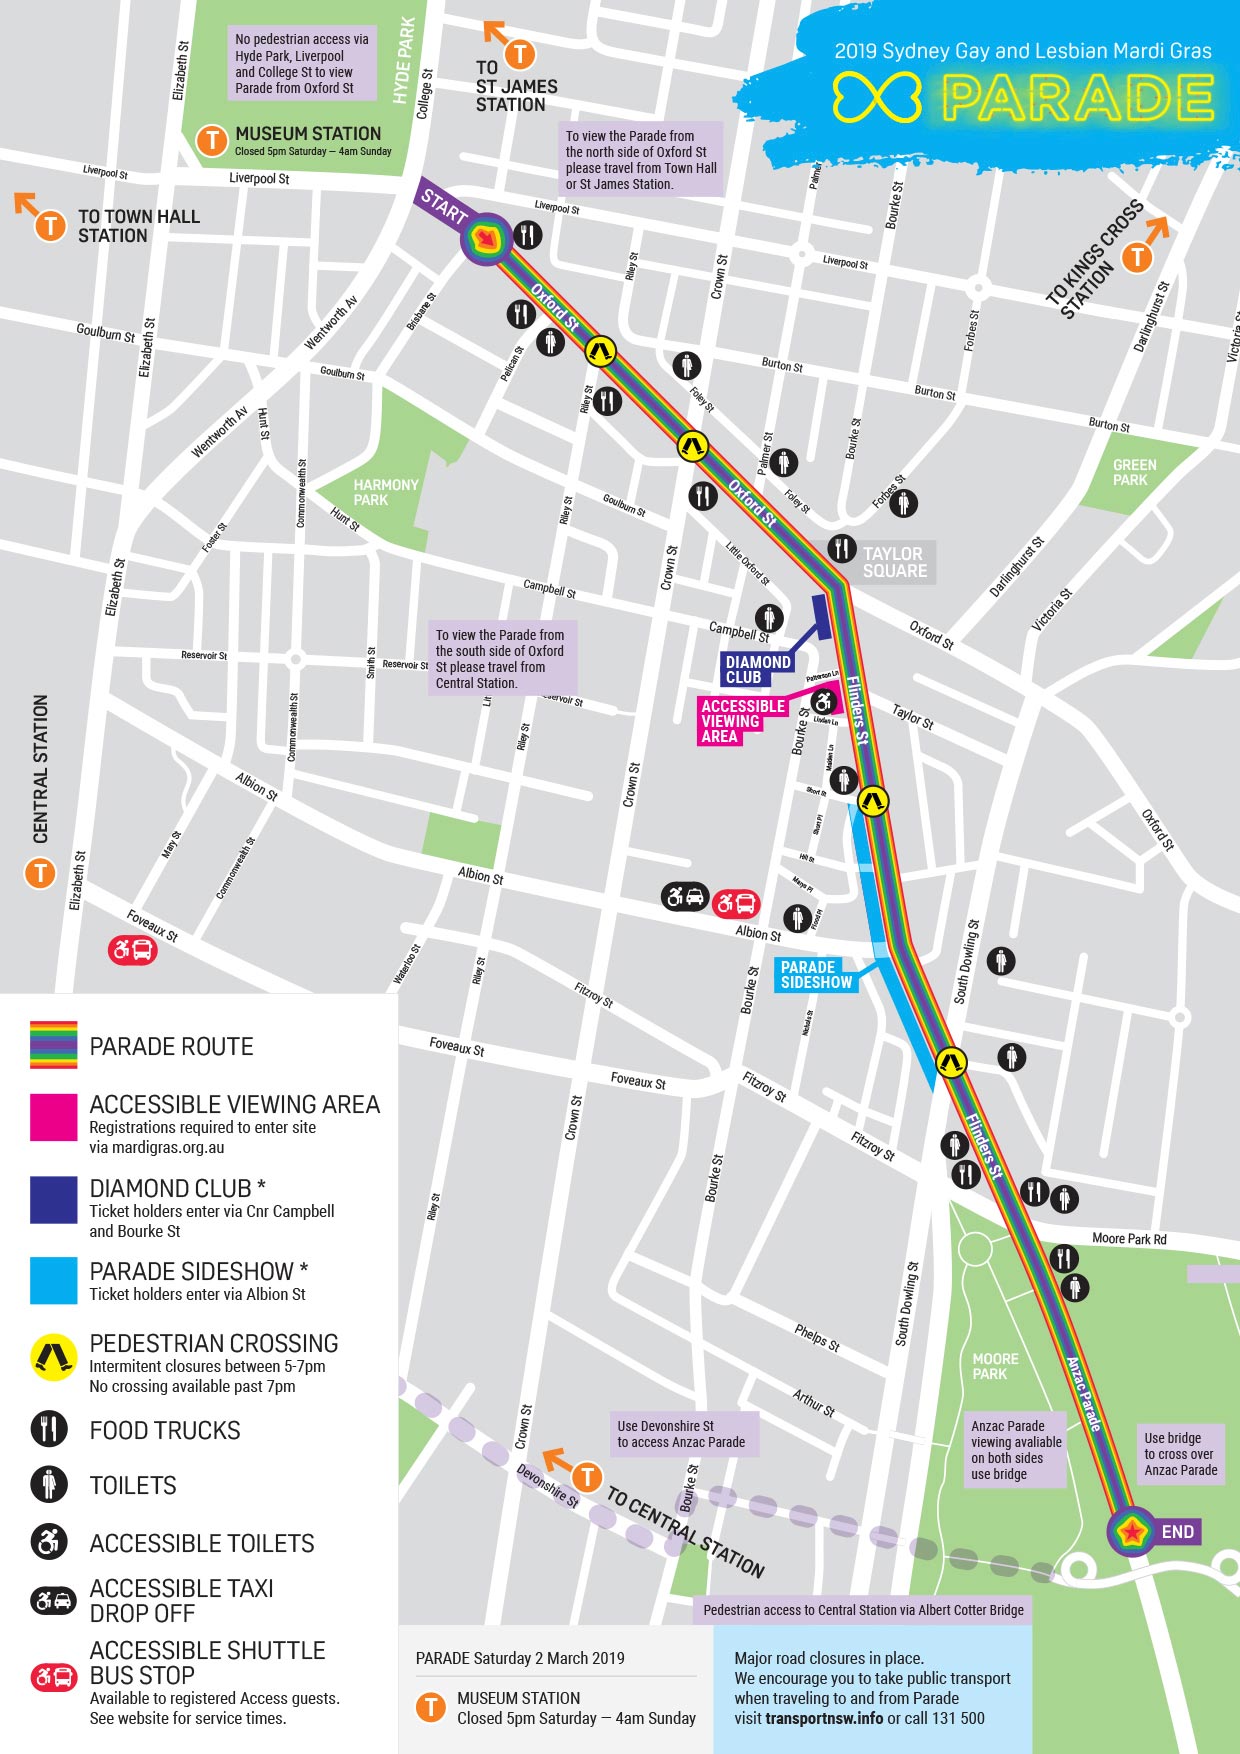 2019 Sydney Gay and Lesbian Mardi Gras Parade route map.